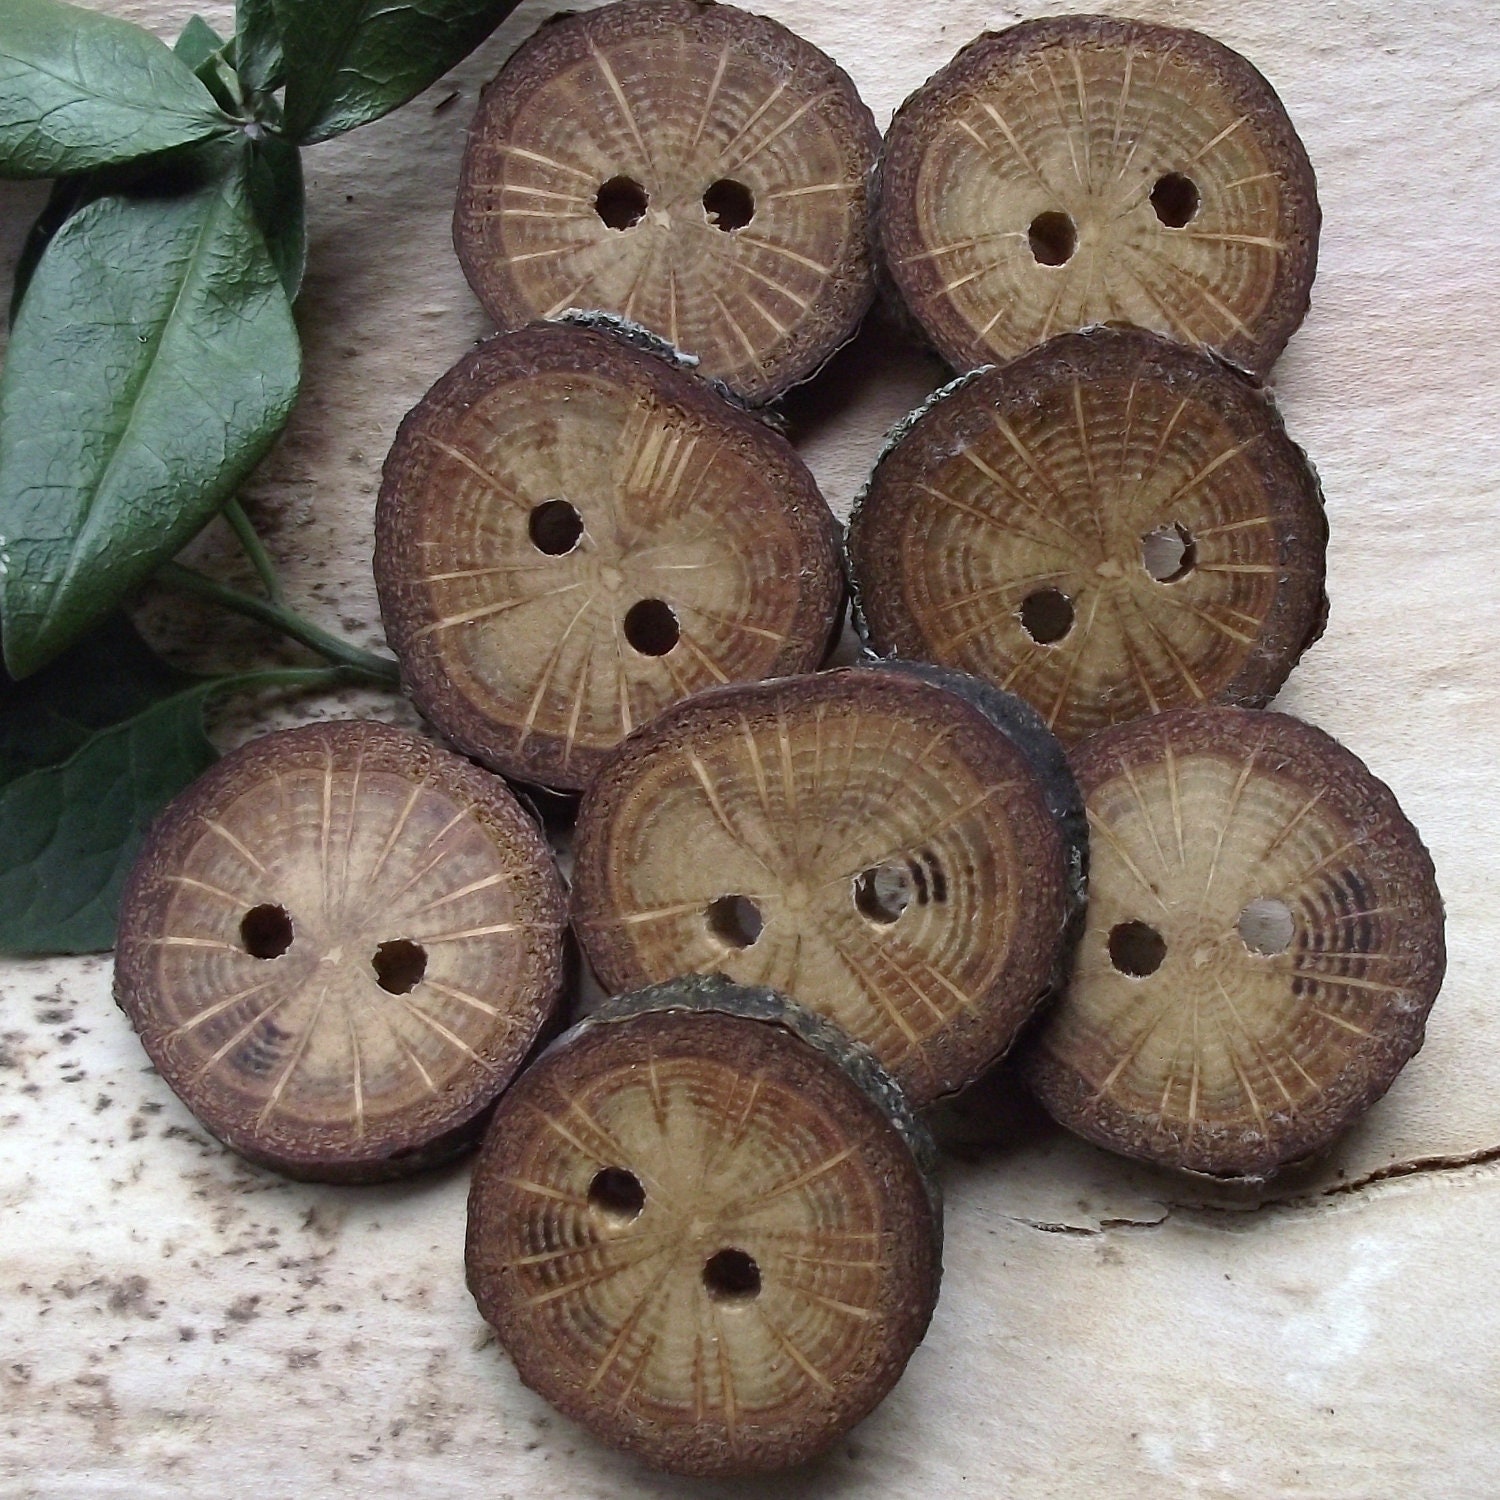 Small Wood Buttons - 8 Ohio Oak Wooden Tree Branch Buttons with Bark - 1 1/4 inches, 2 Holes, For Knitting, Journals, Pillows, Purses